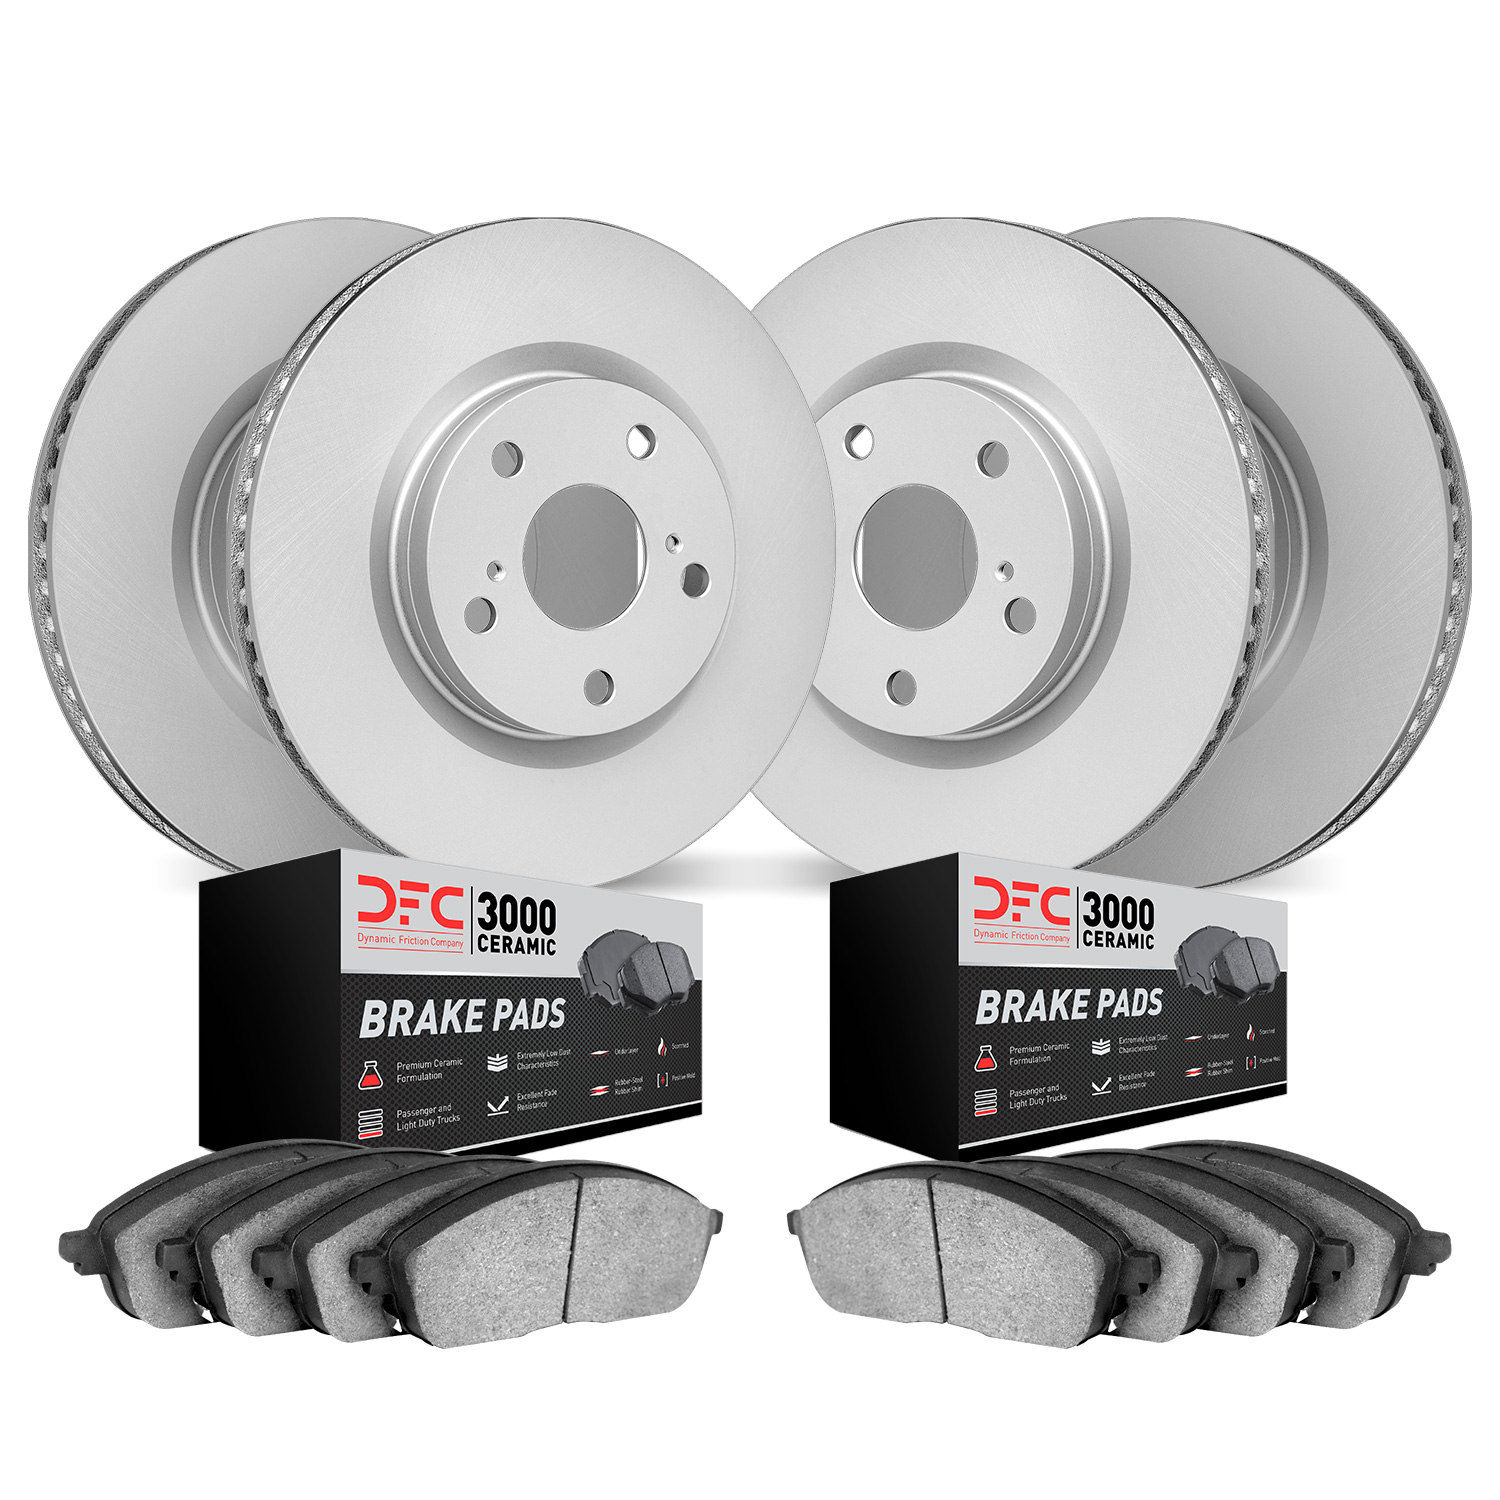 4304-75021 Geospec Brake Rotors with 3000-Series Ceramic Brake Pads Kit, 2007-2021 Lexus/Toyota/Scion, Position: Front and Rear